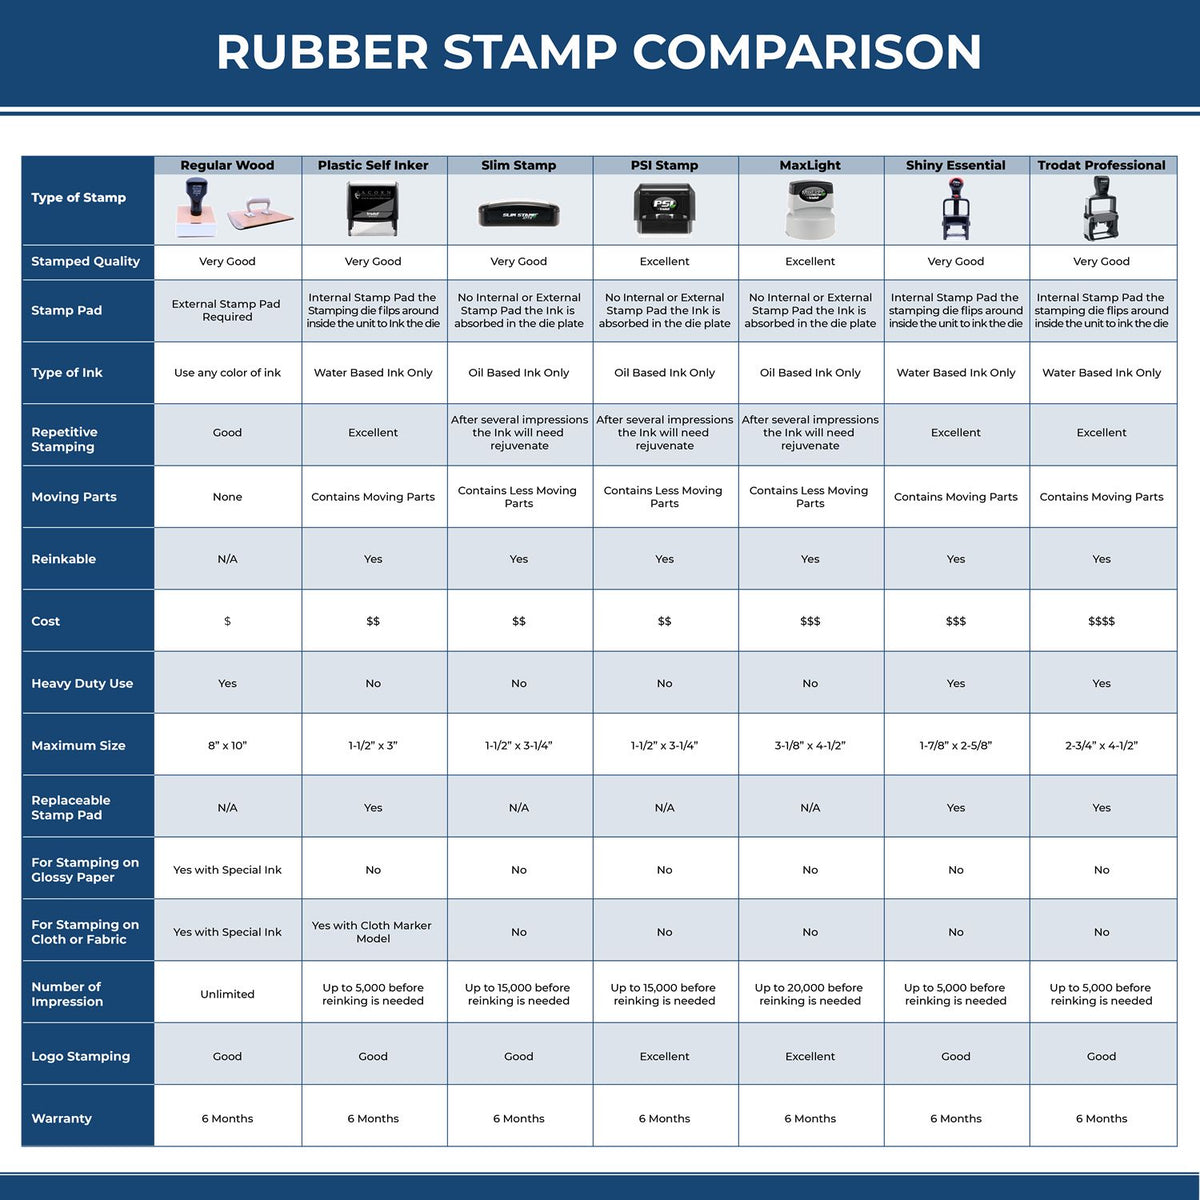 Large Self Inking No Referral Needed Stamp 4518S Rubber Stamp Comparison